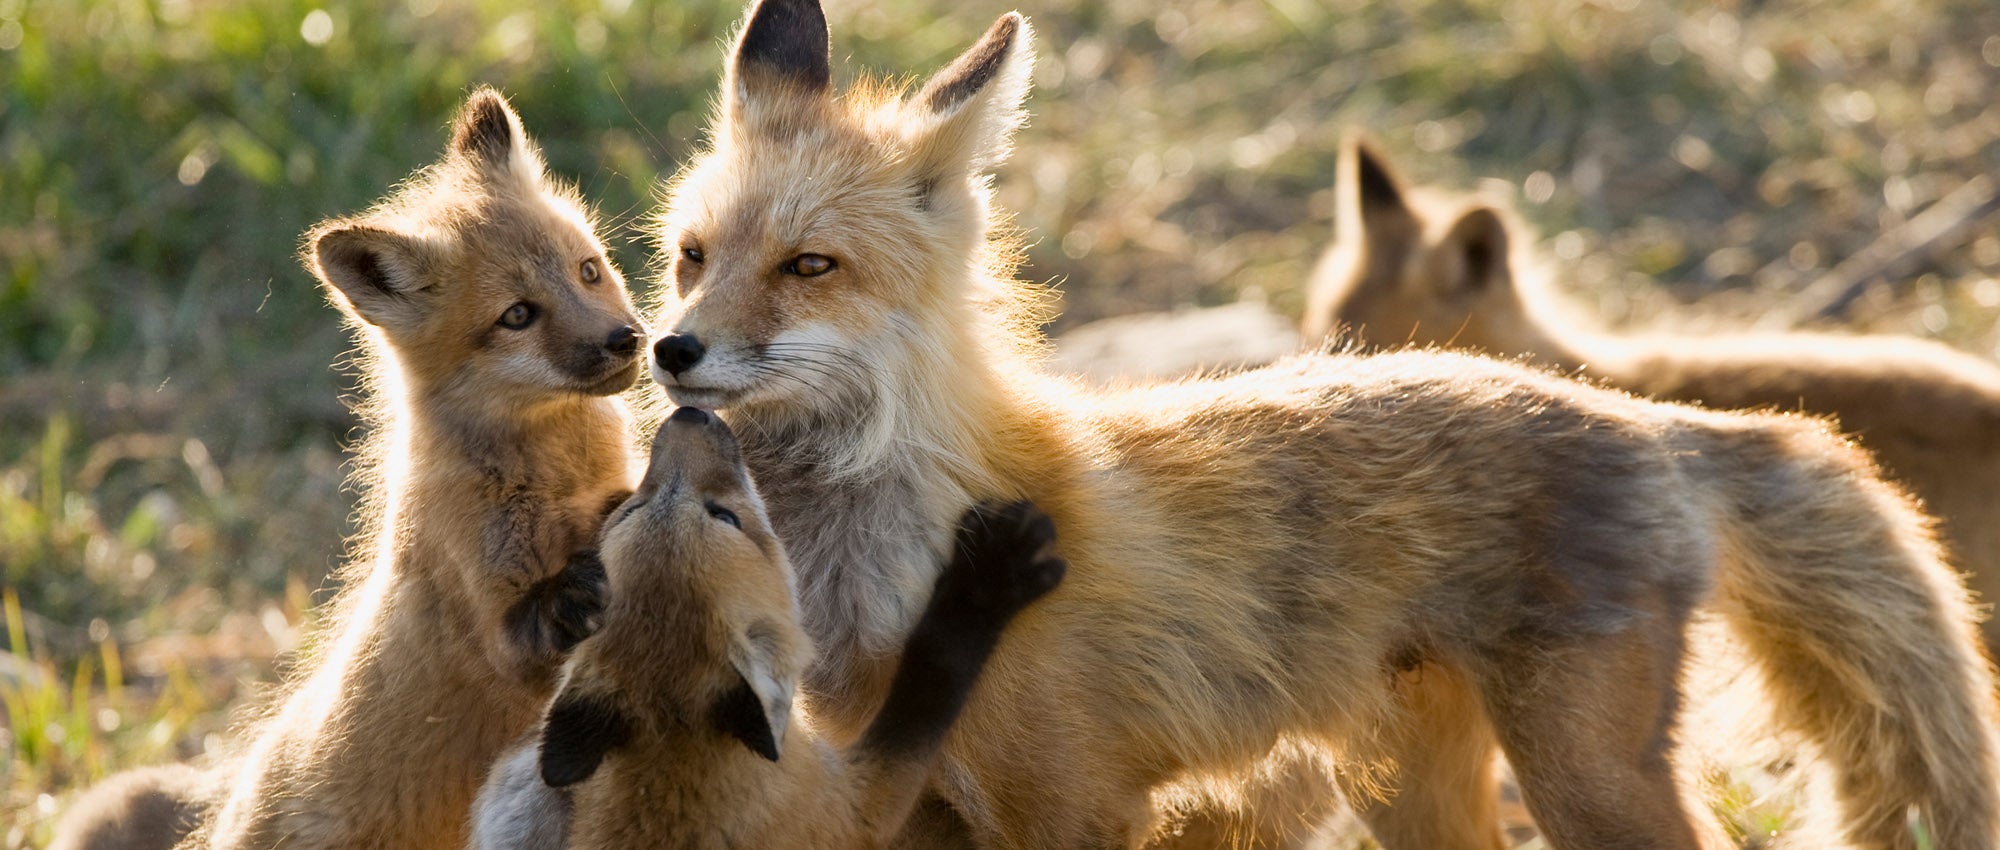 What to do about foxes | The Humane Society of the United States